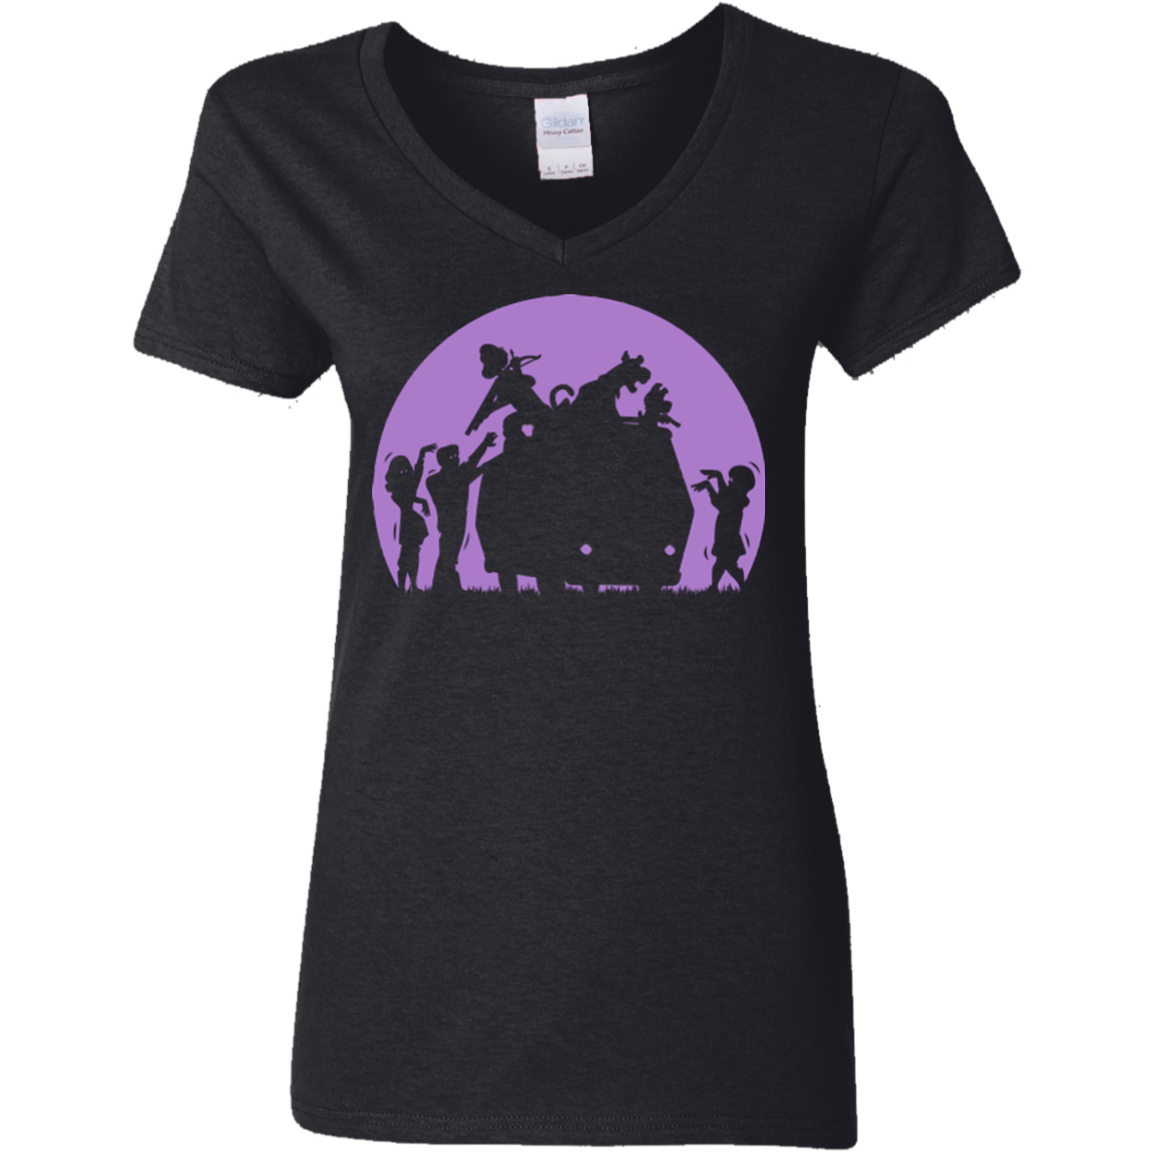 Zoinks They're Zombies Women's V-Neck T-Shirt